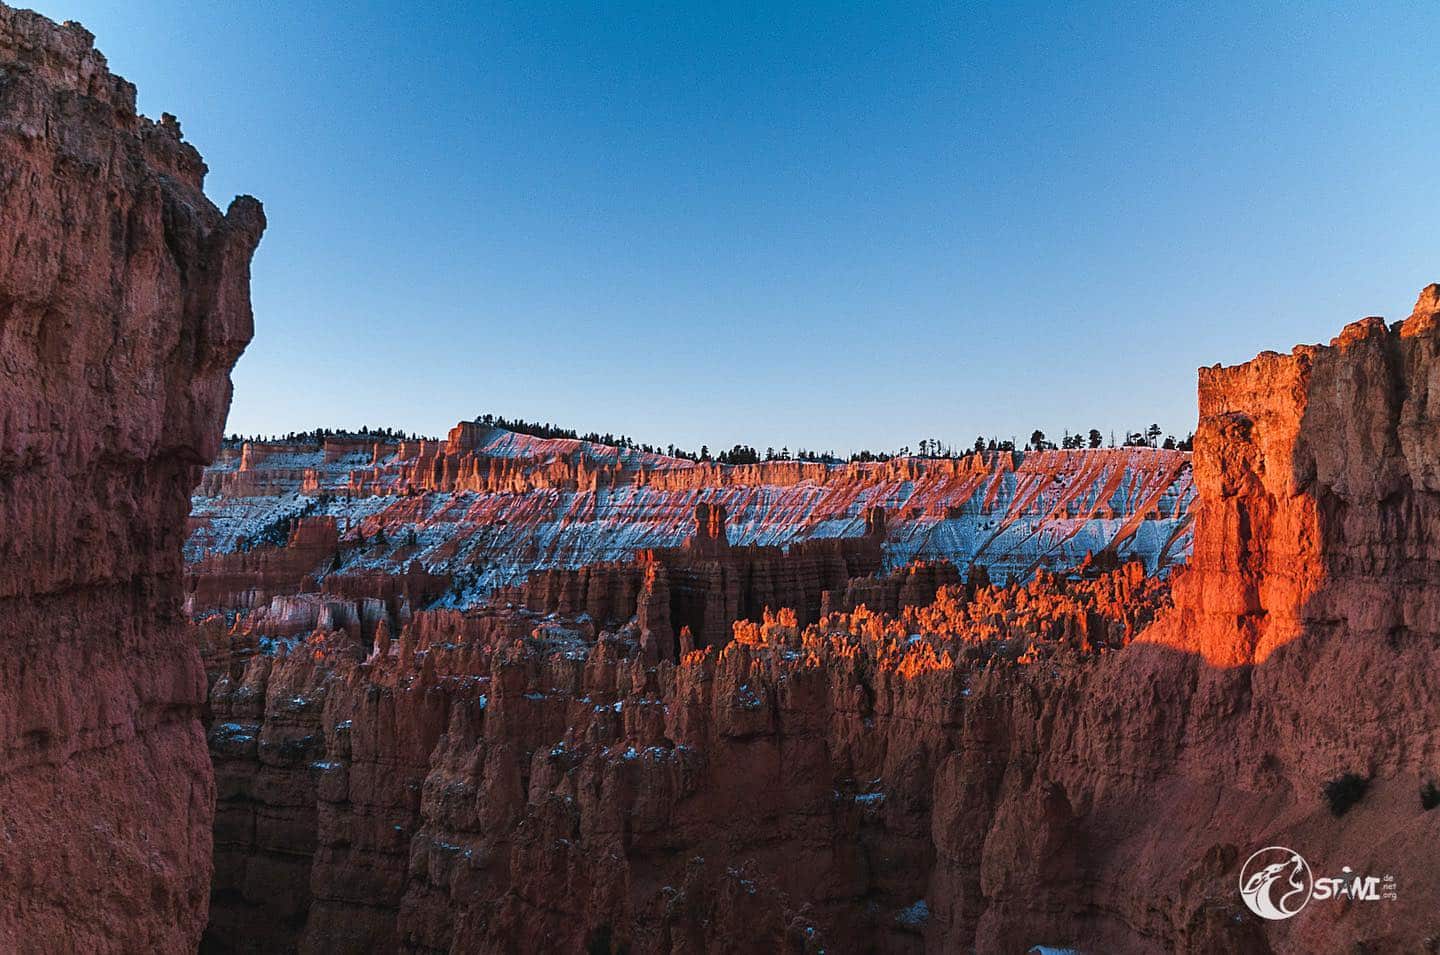 Five years ago, a gigantic sunrise over Bryce Canyon.